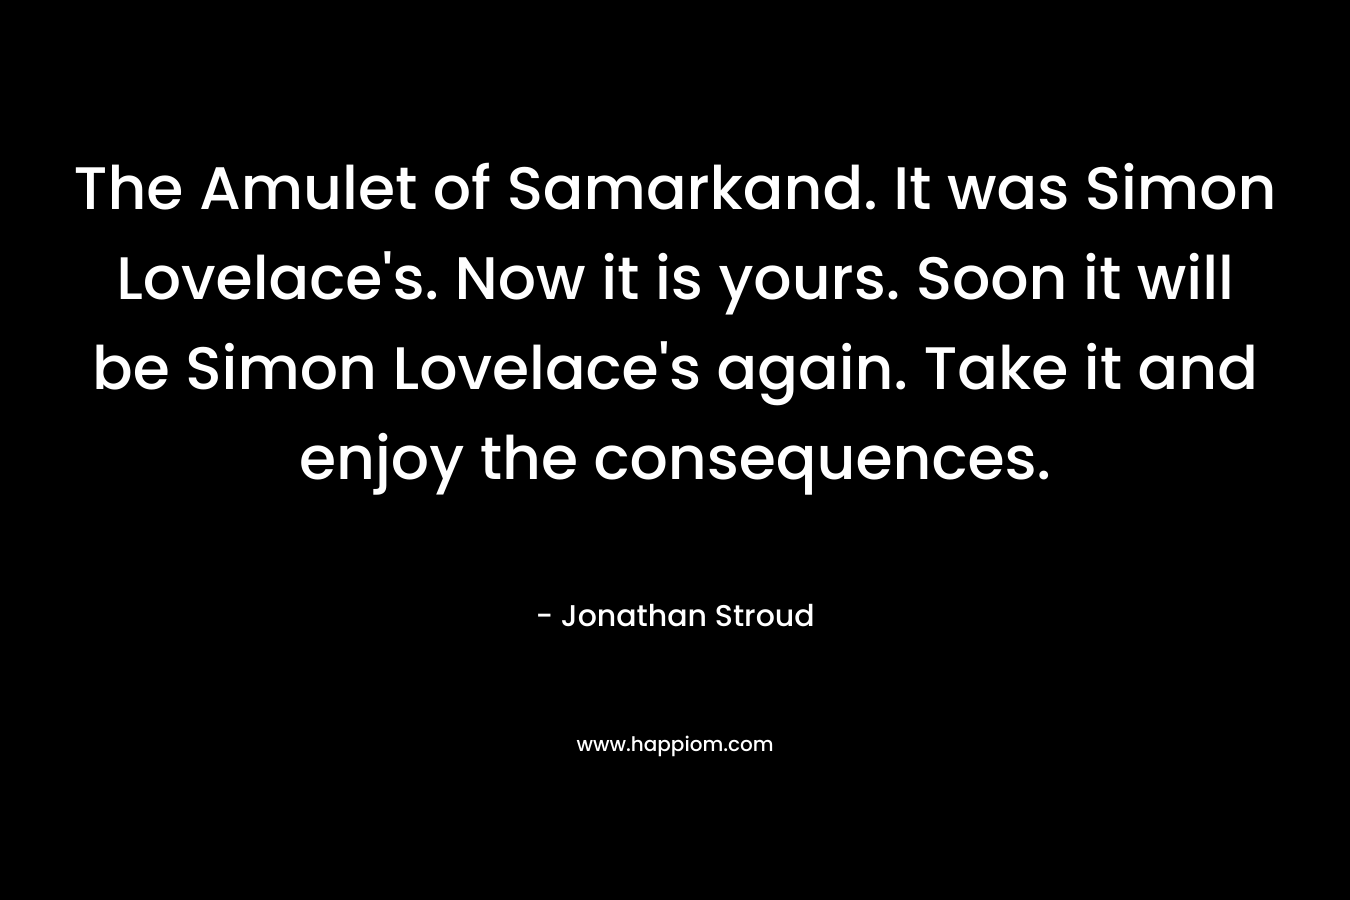 The Amulet of Samarkand. It was Simon Lovelace’s. Now it is yours. Soon it will be Simon Lovelace’s again. Take it and enjoy the consequences. – Jonathan Stroud